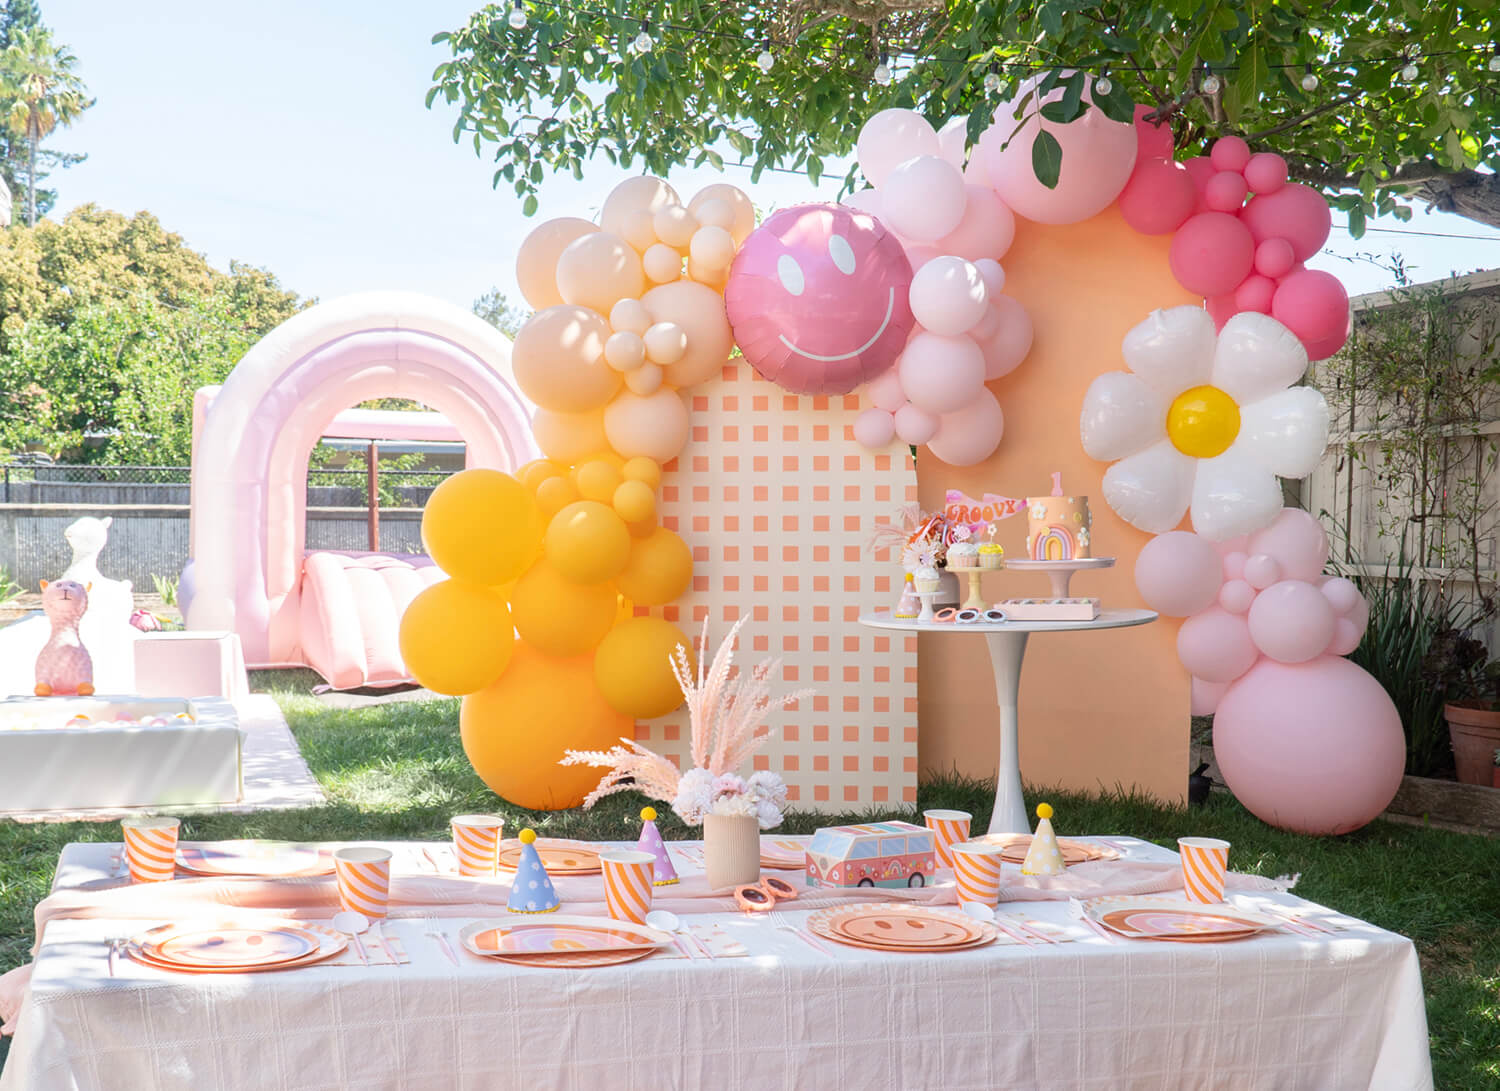 One Groovy Baby Groovy One Hippie themed Girl's First Birthday Party Ideas by Momo Party, including party decorations, table setting, activities, party favors and more!